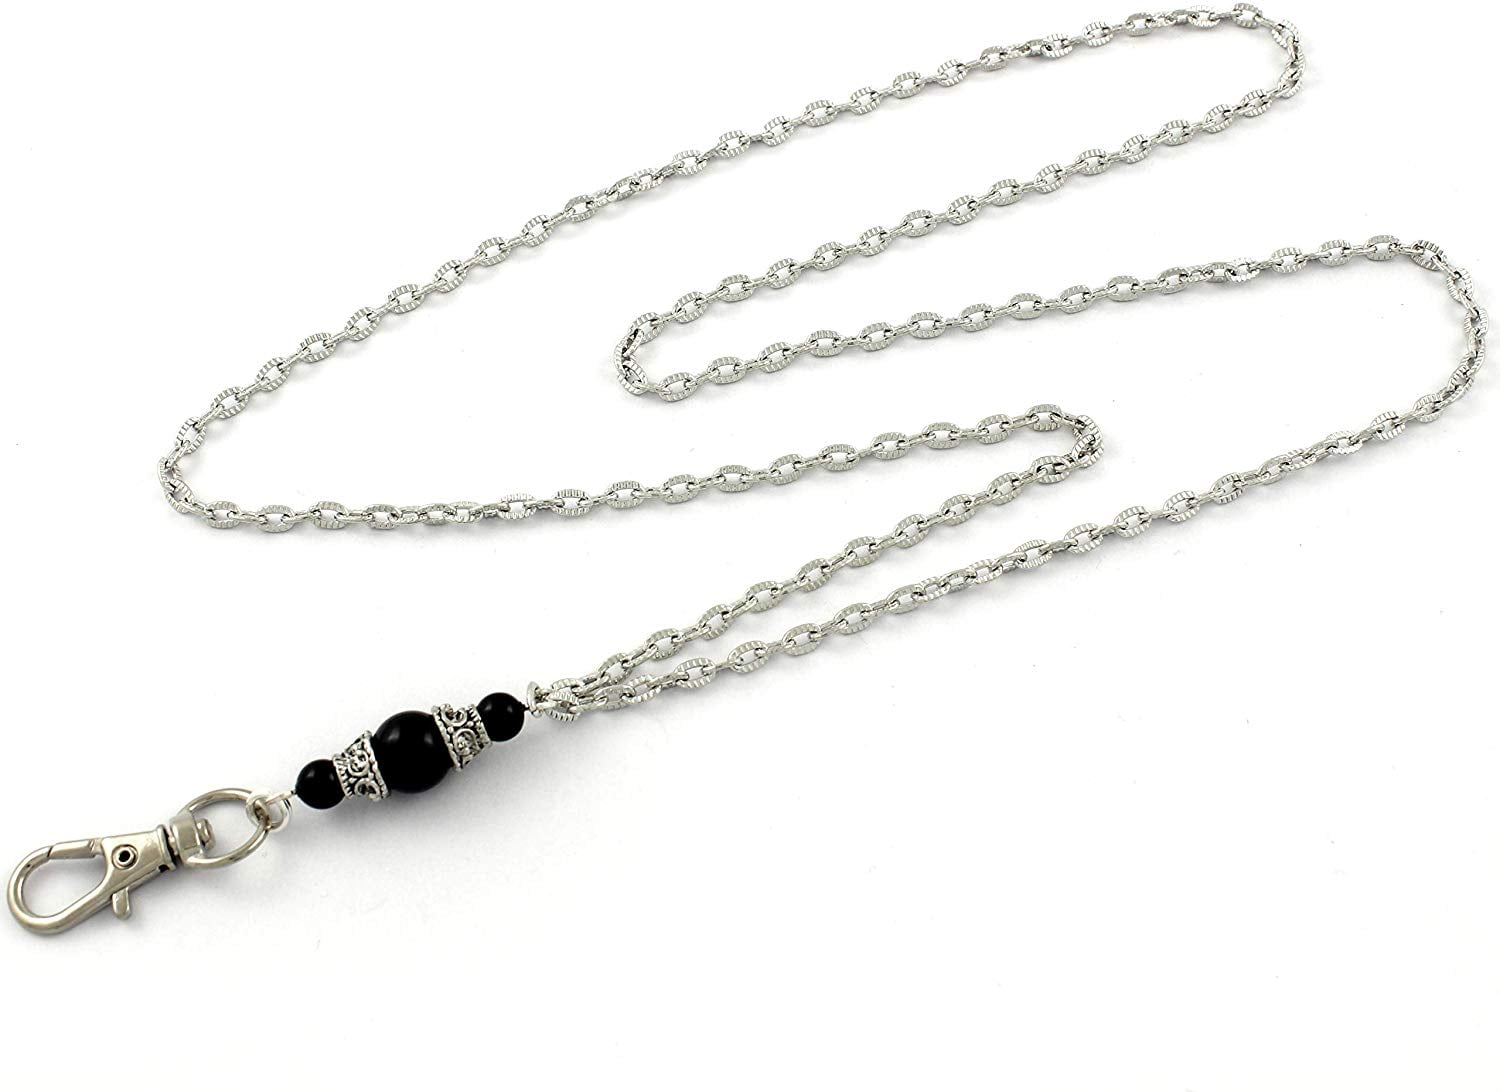 Details about   Beaded Necklace Lanyard holder Black pearls silver flower cruise work id badge 